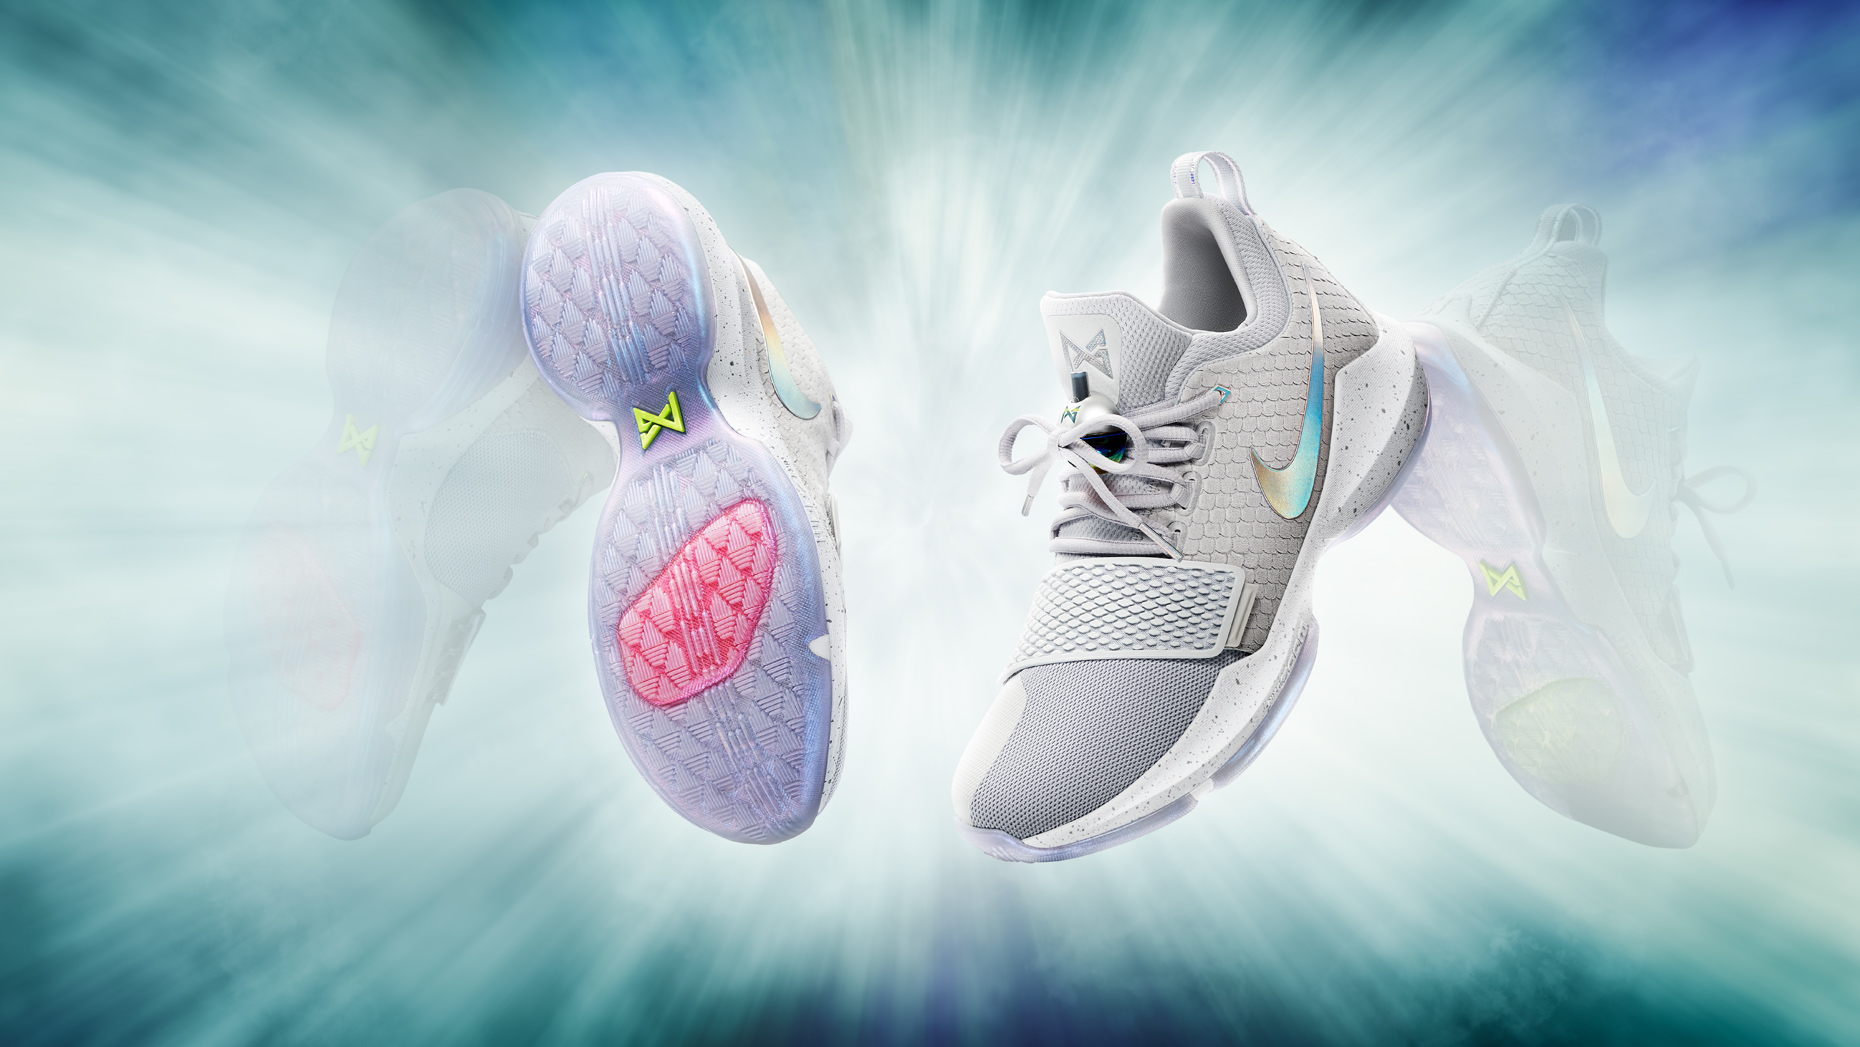 Nike Footwear Image Effects, Retouching and Environment Creation